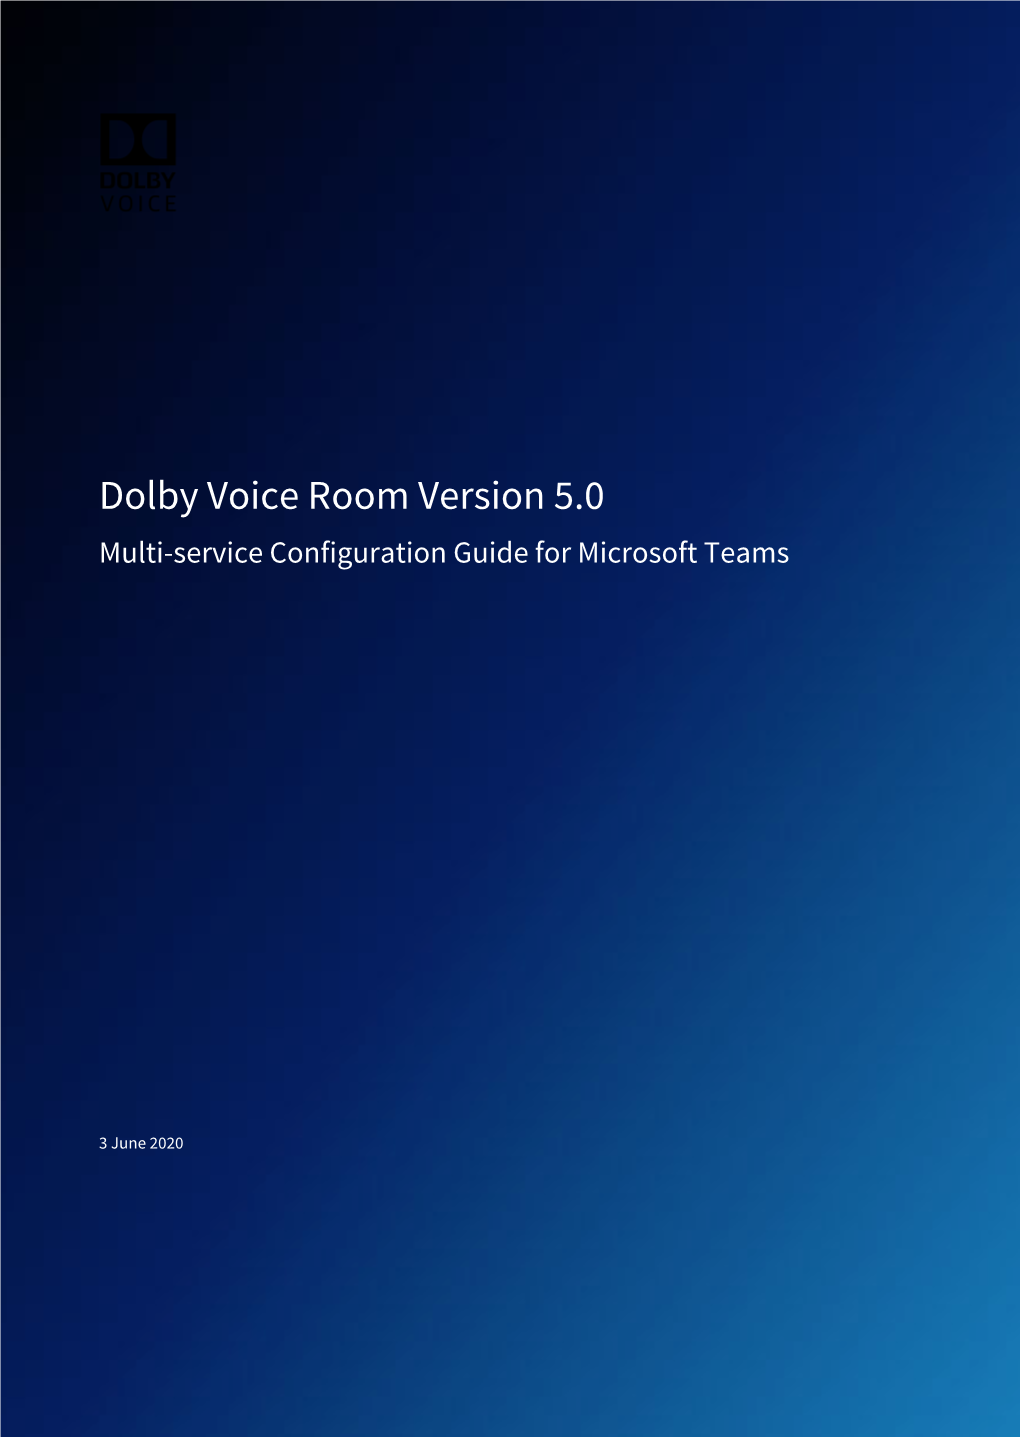 Dolby Voice Room Version 5.0 Multi-Service Configuration Guide for Microsoft Teams